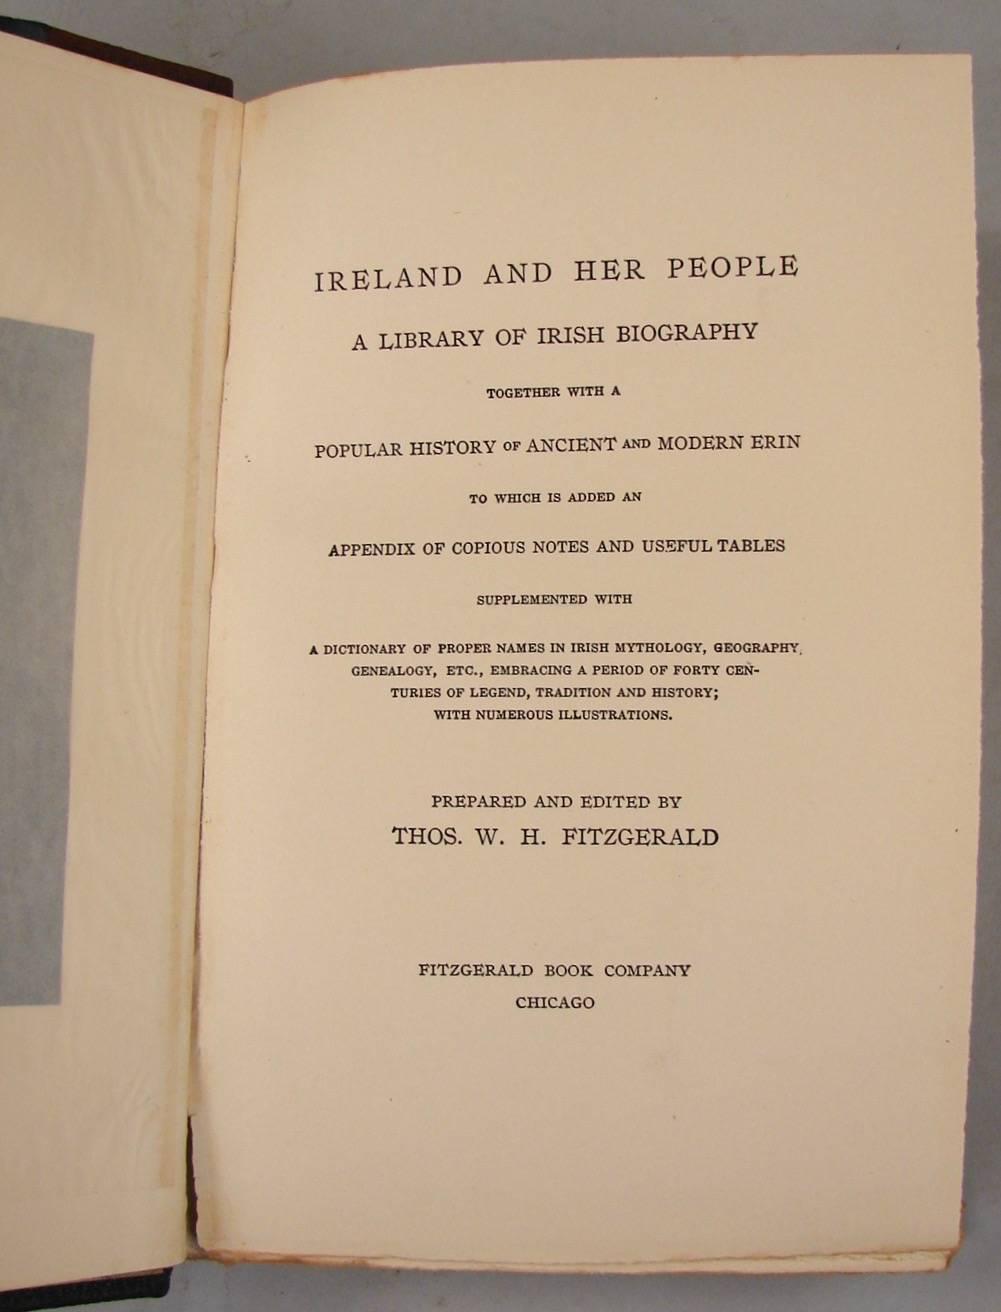 Irish Ireland and Her People Five Volumes by Thomas Fitzgerald Leather-Bound